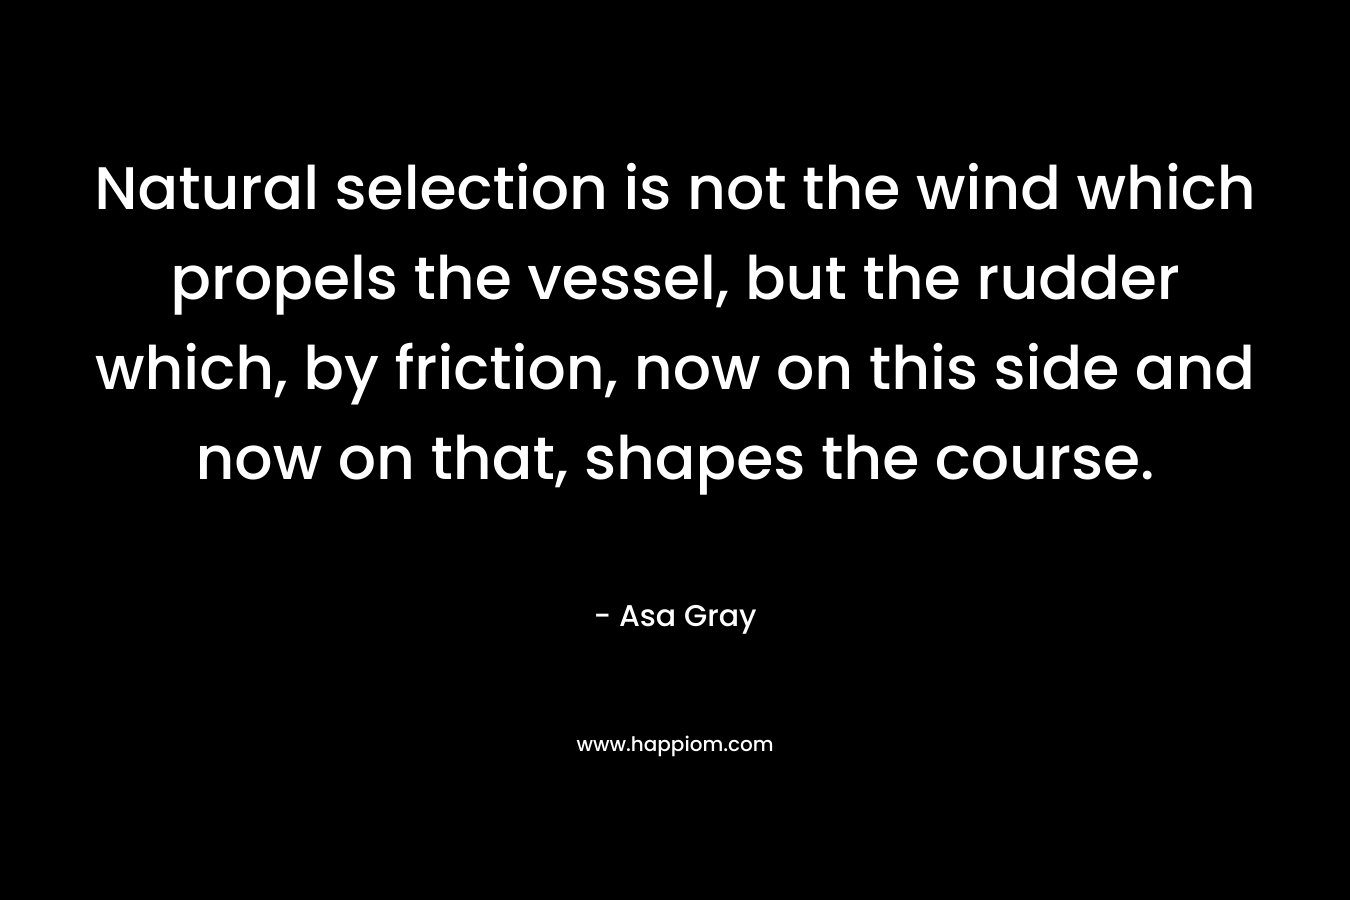 Natural selection is not the wind which propels the vessel, but the rudder which, by friction, now on this side and now on that, shapes the course. – Asa Gray